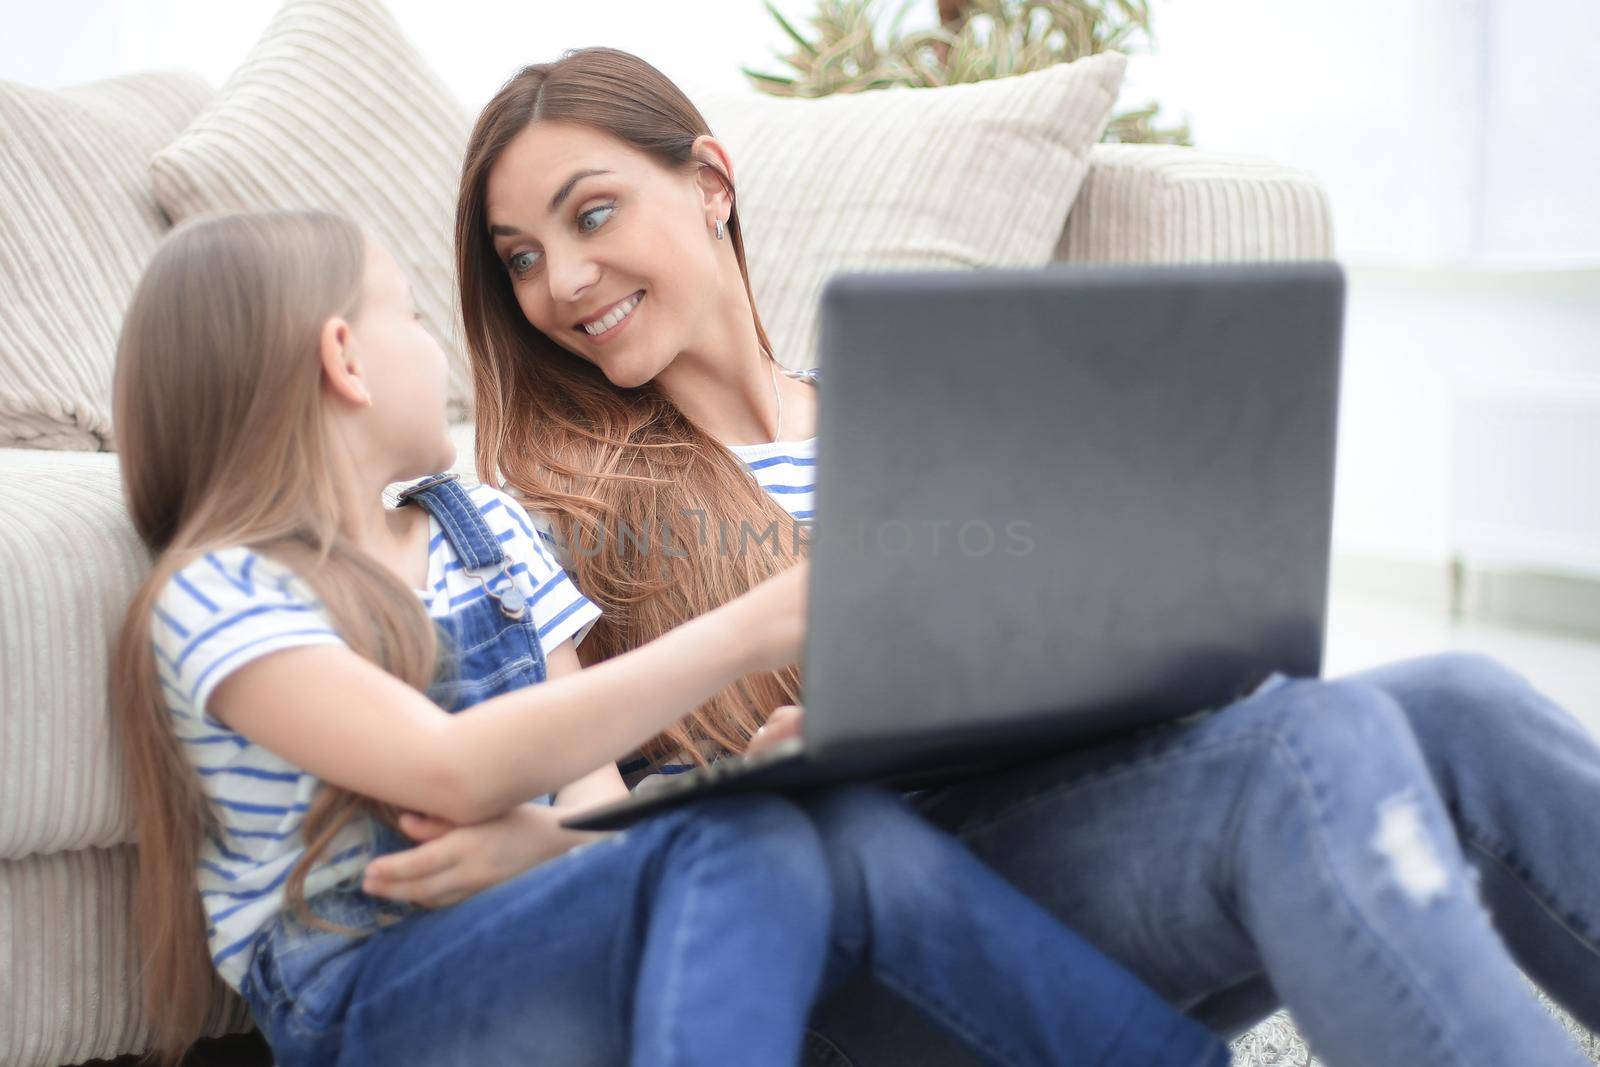 mother and daughter spend their free time together by asdf